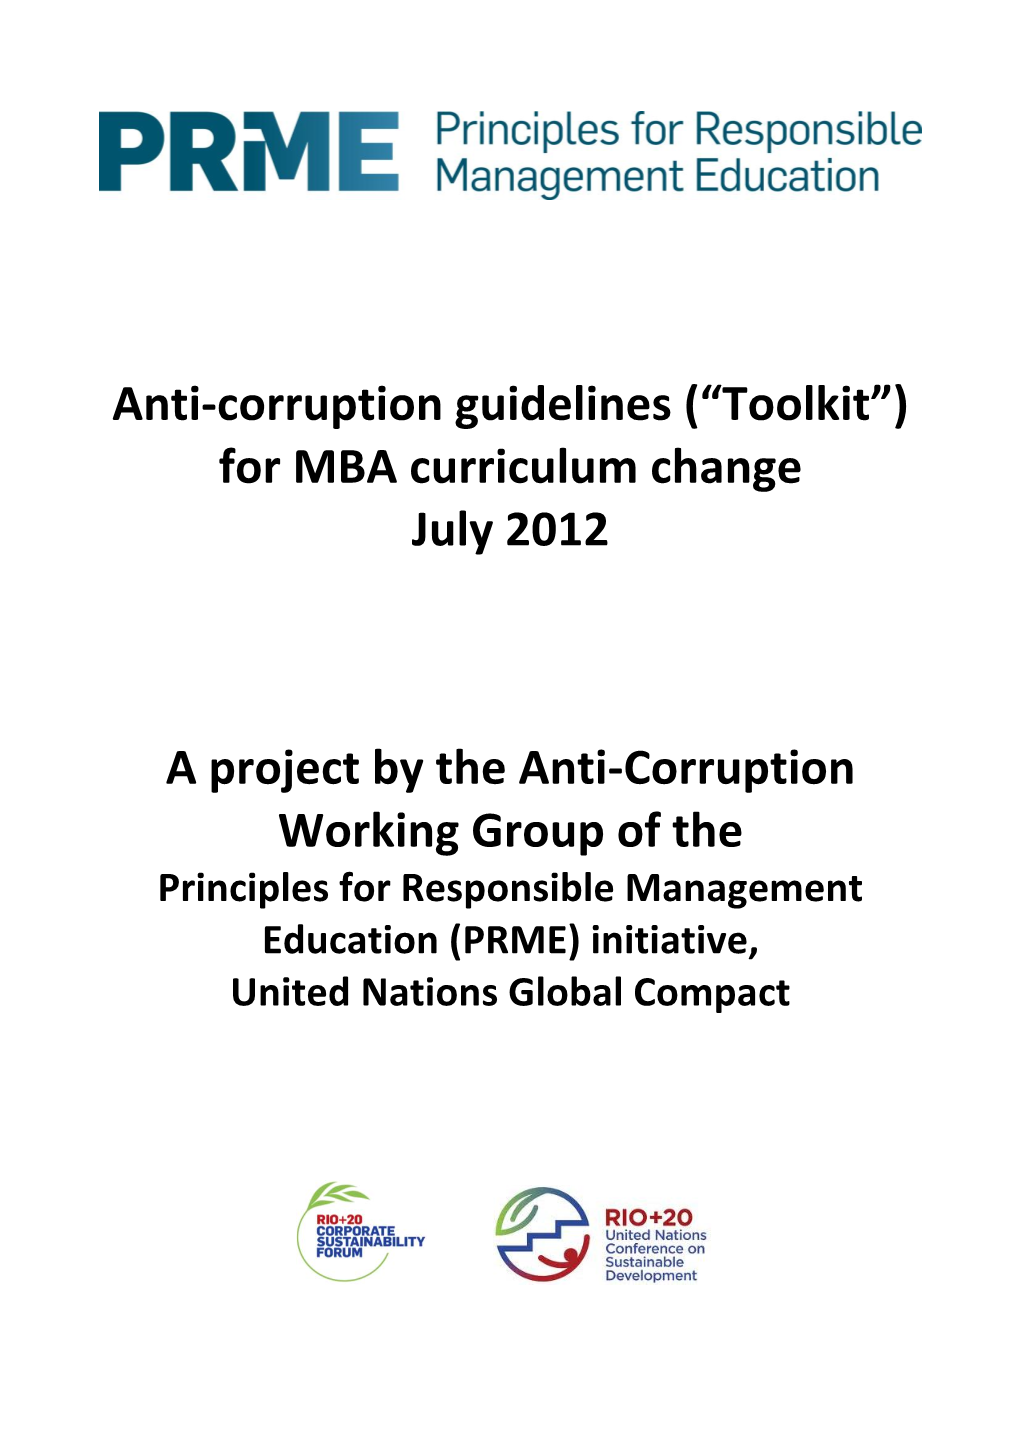 Anti-Corruption Guidelines (“Toolkit”) for MBA Curriculum Change July 2012